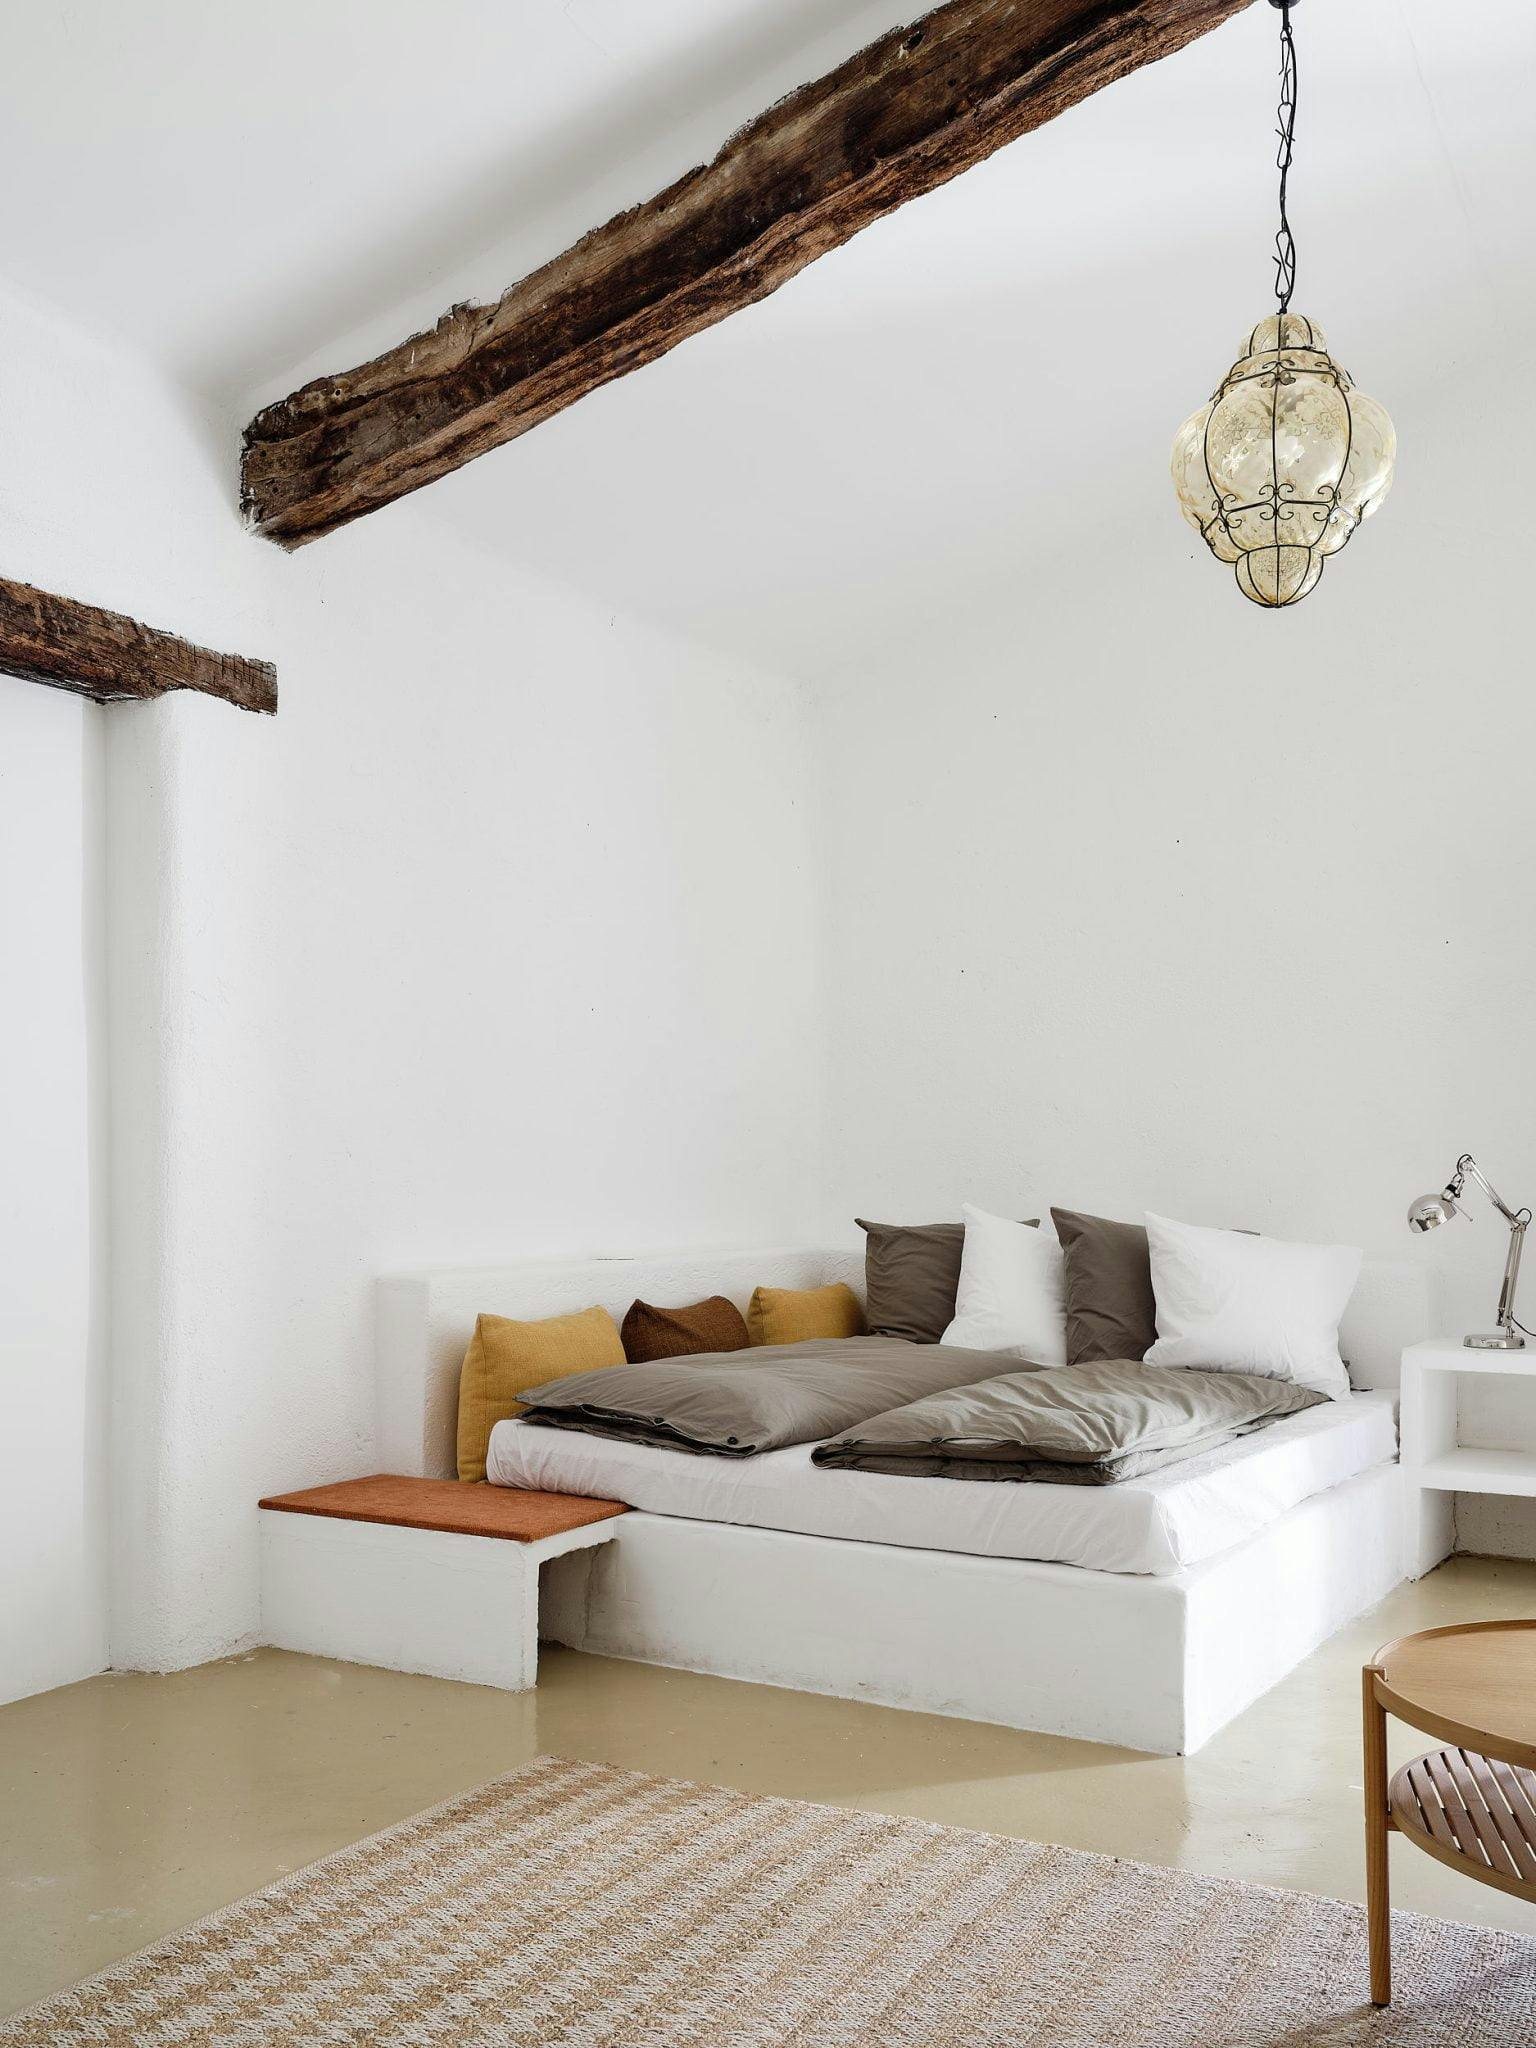 Charming bedroom under the beams